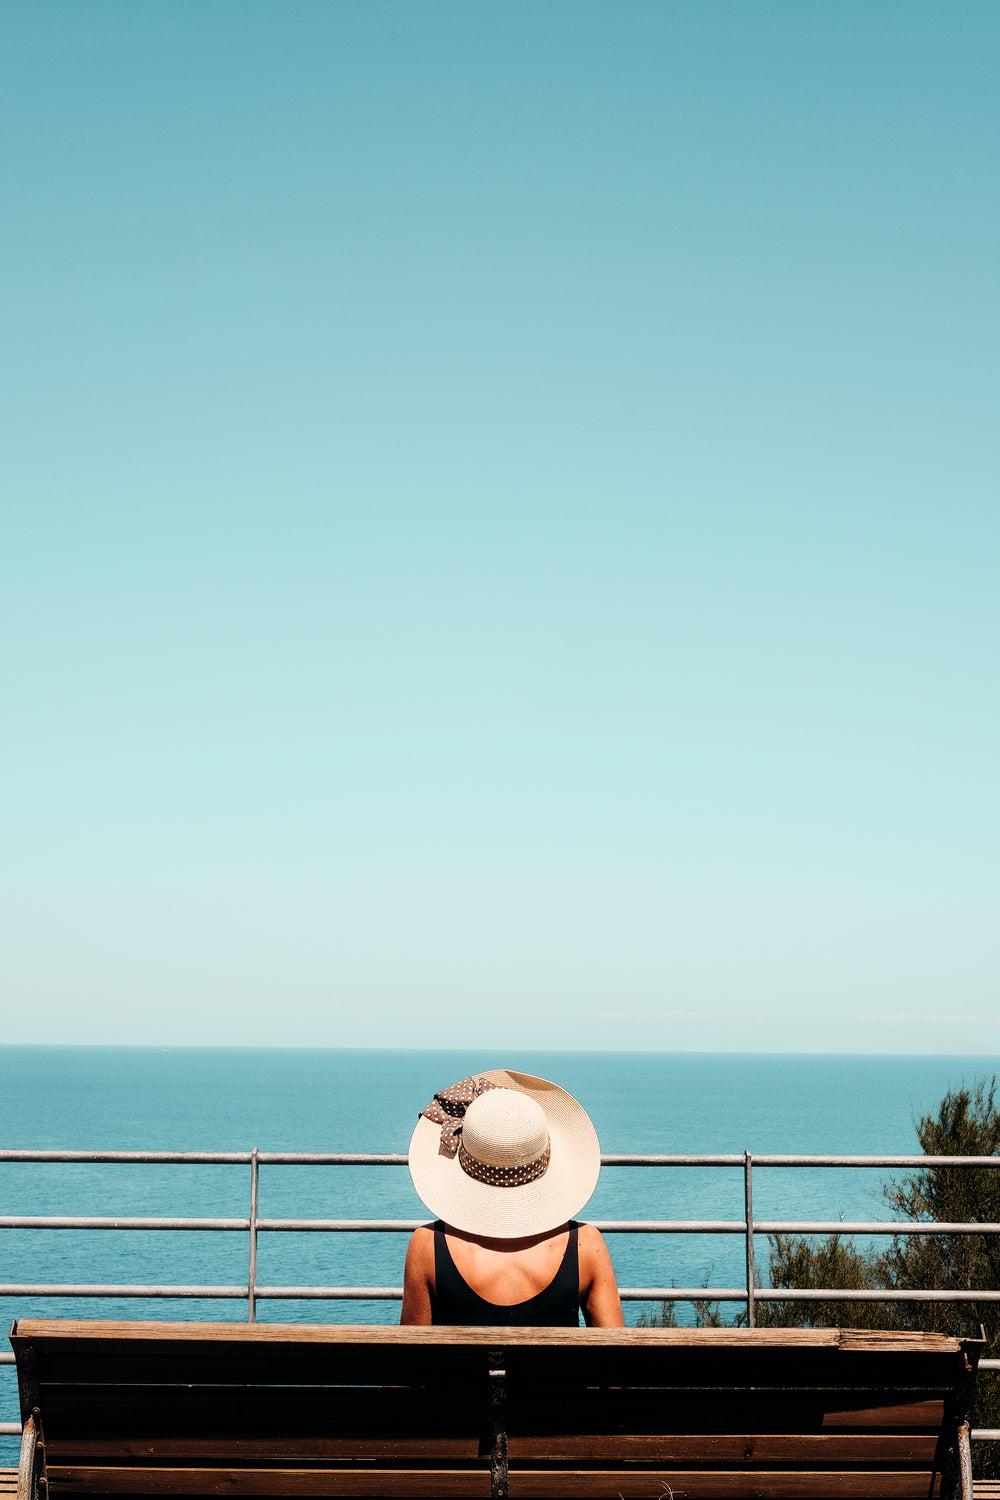 person sitting on a bench and looking out to the ocean